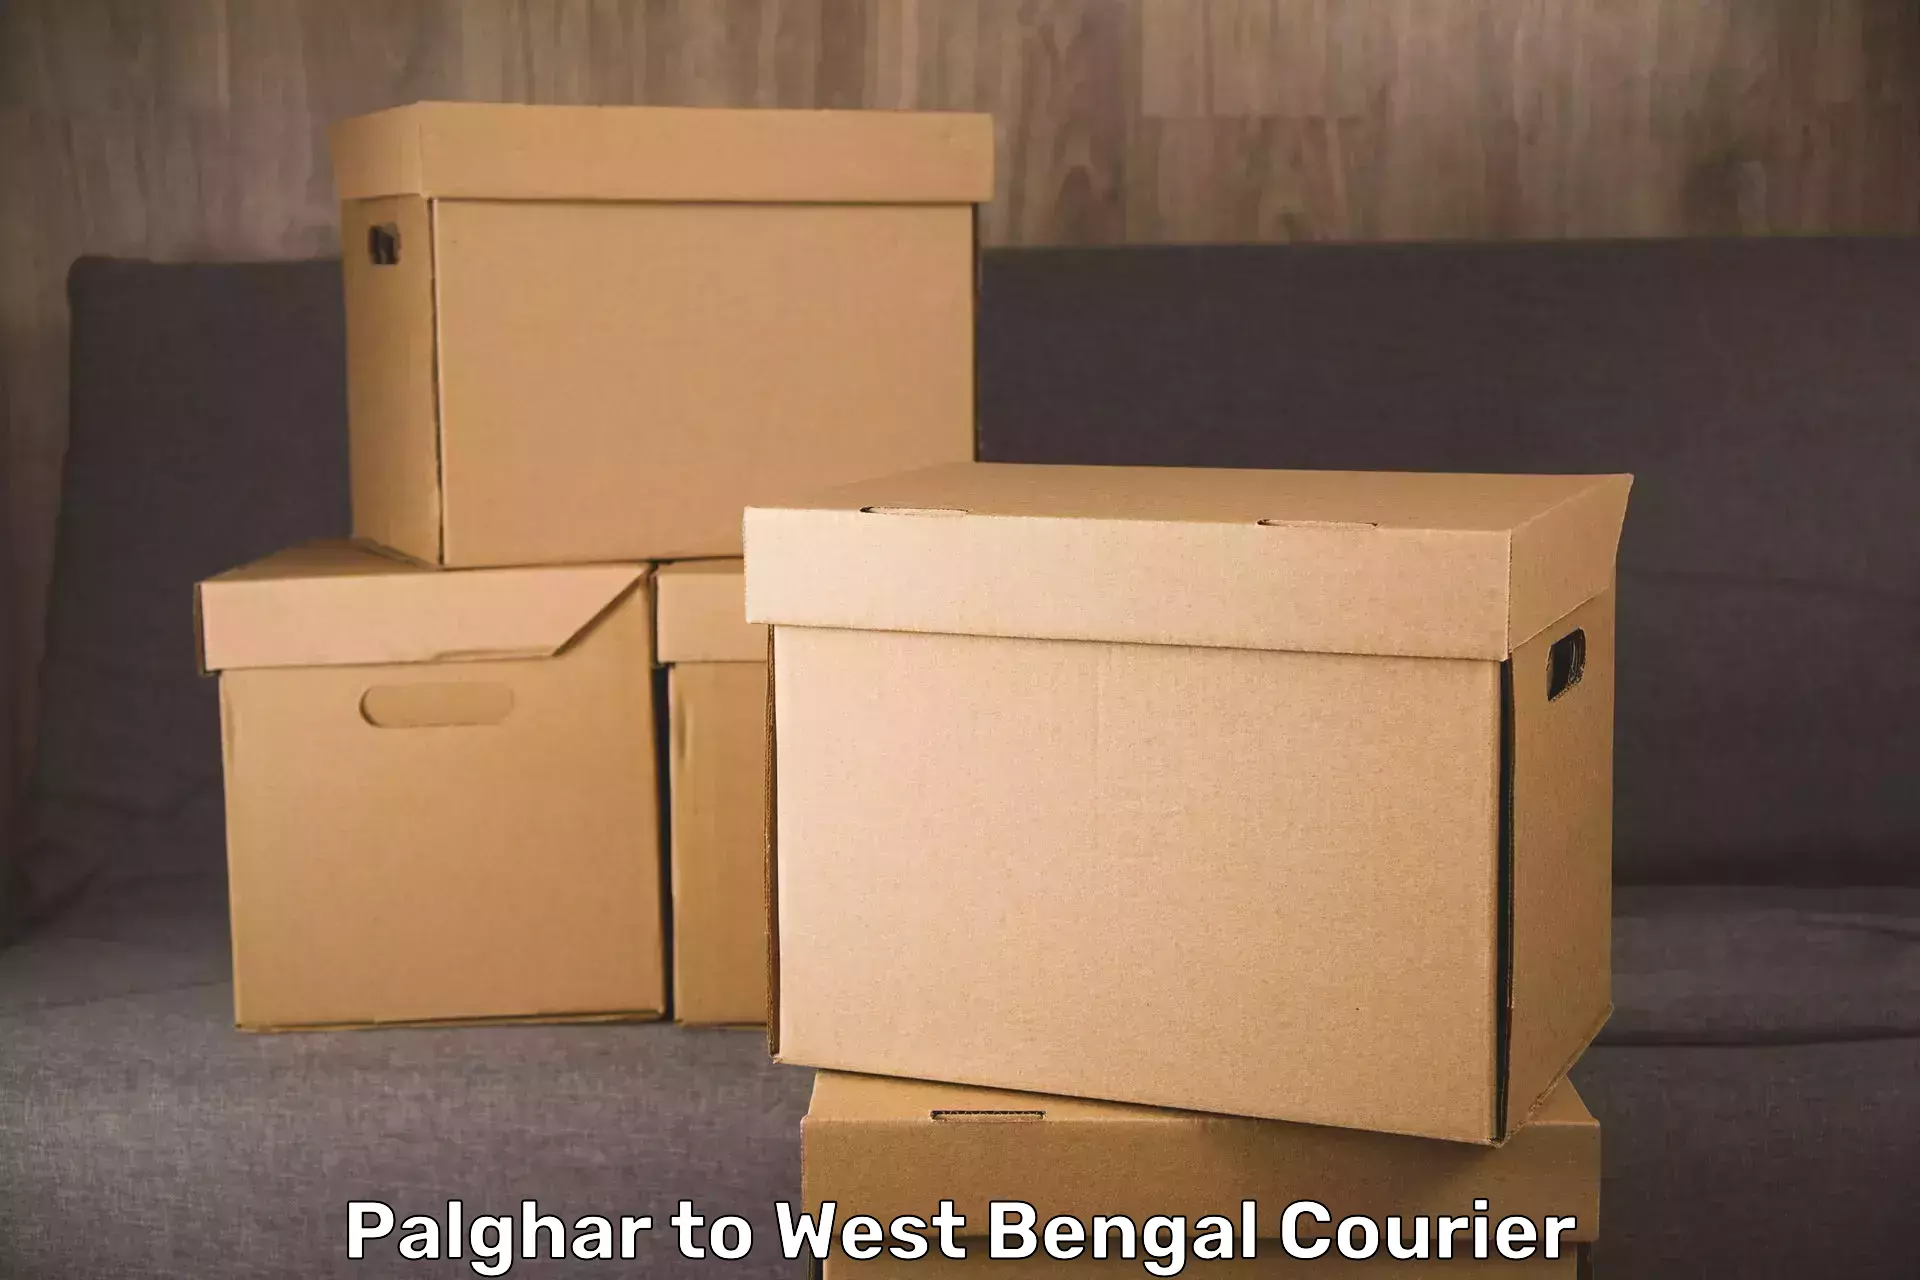 Emergency baggage service Palghar to West Bengal